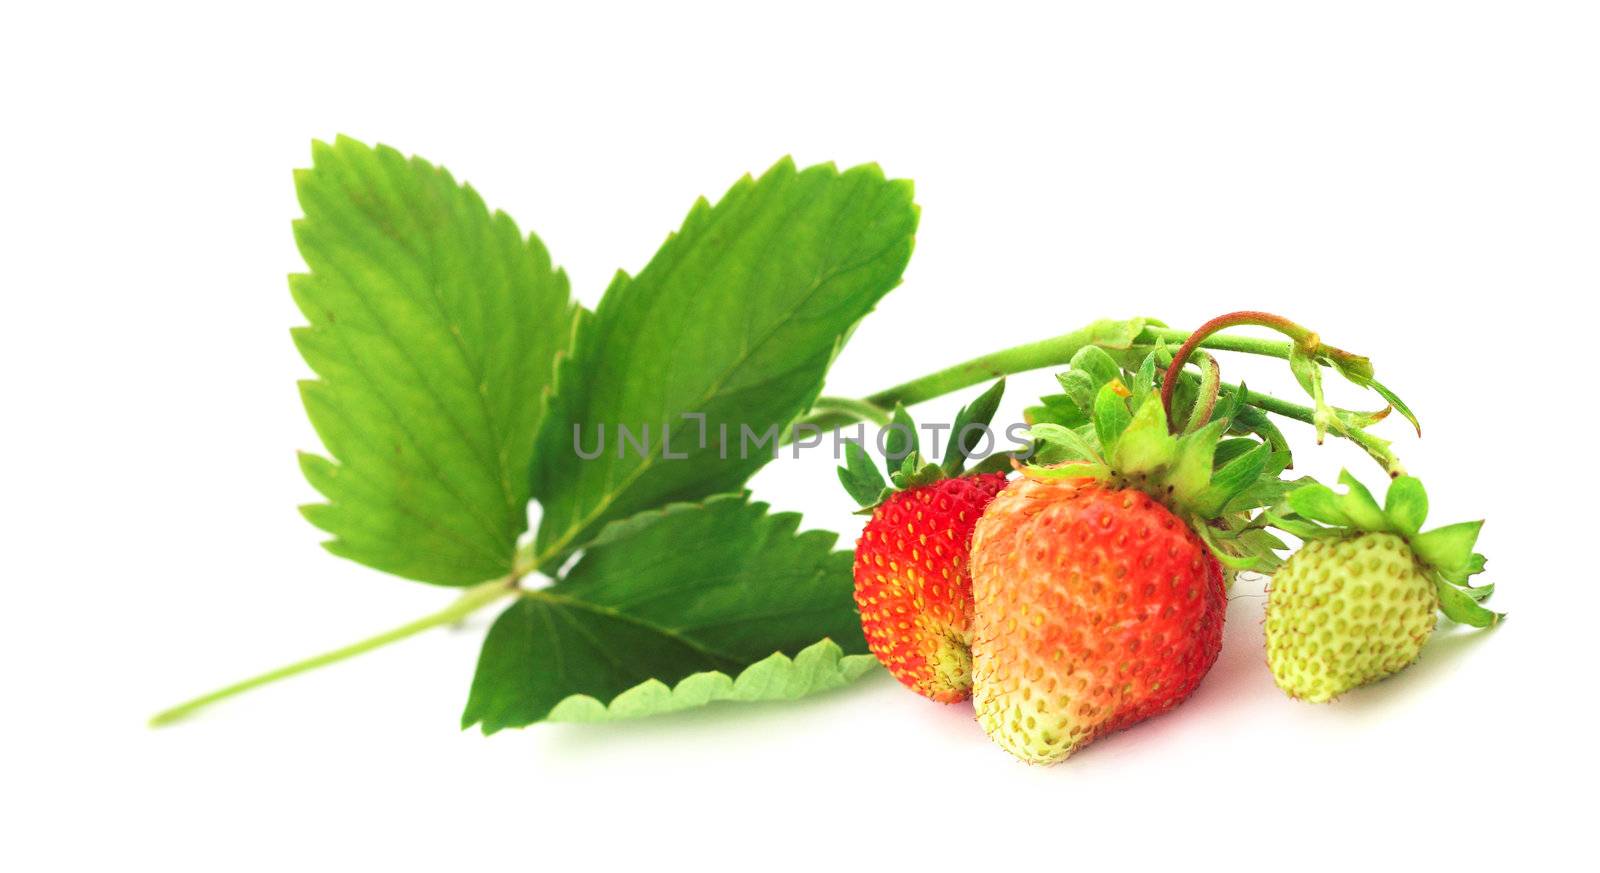 Strawberry with leaves by destillat